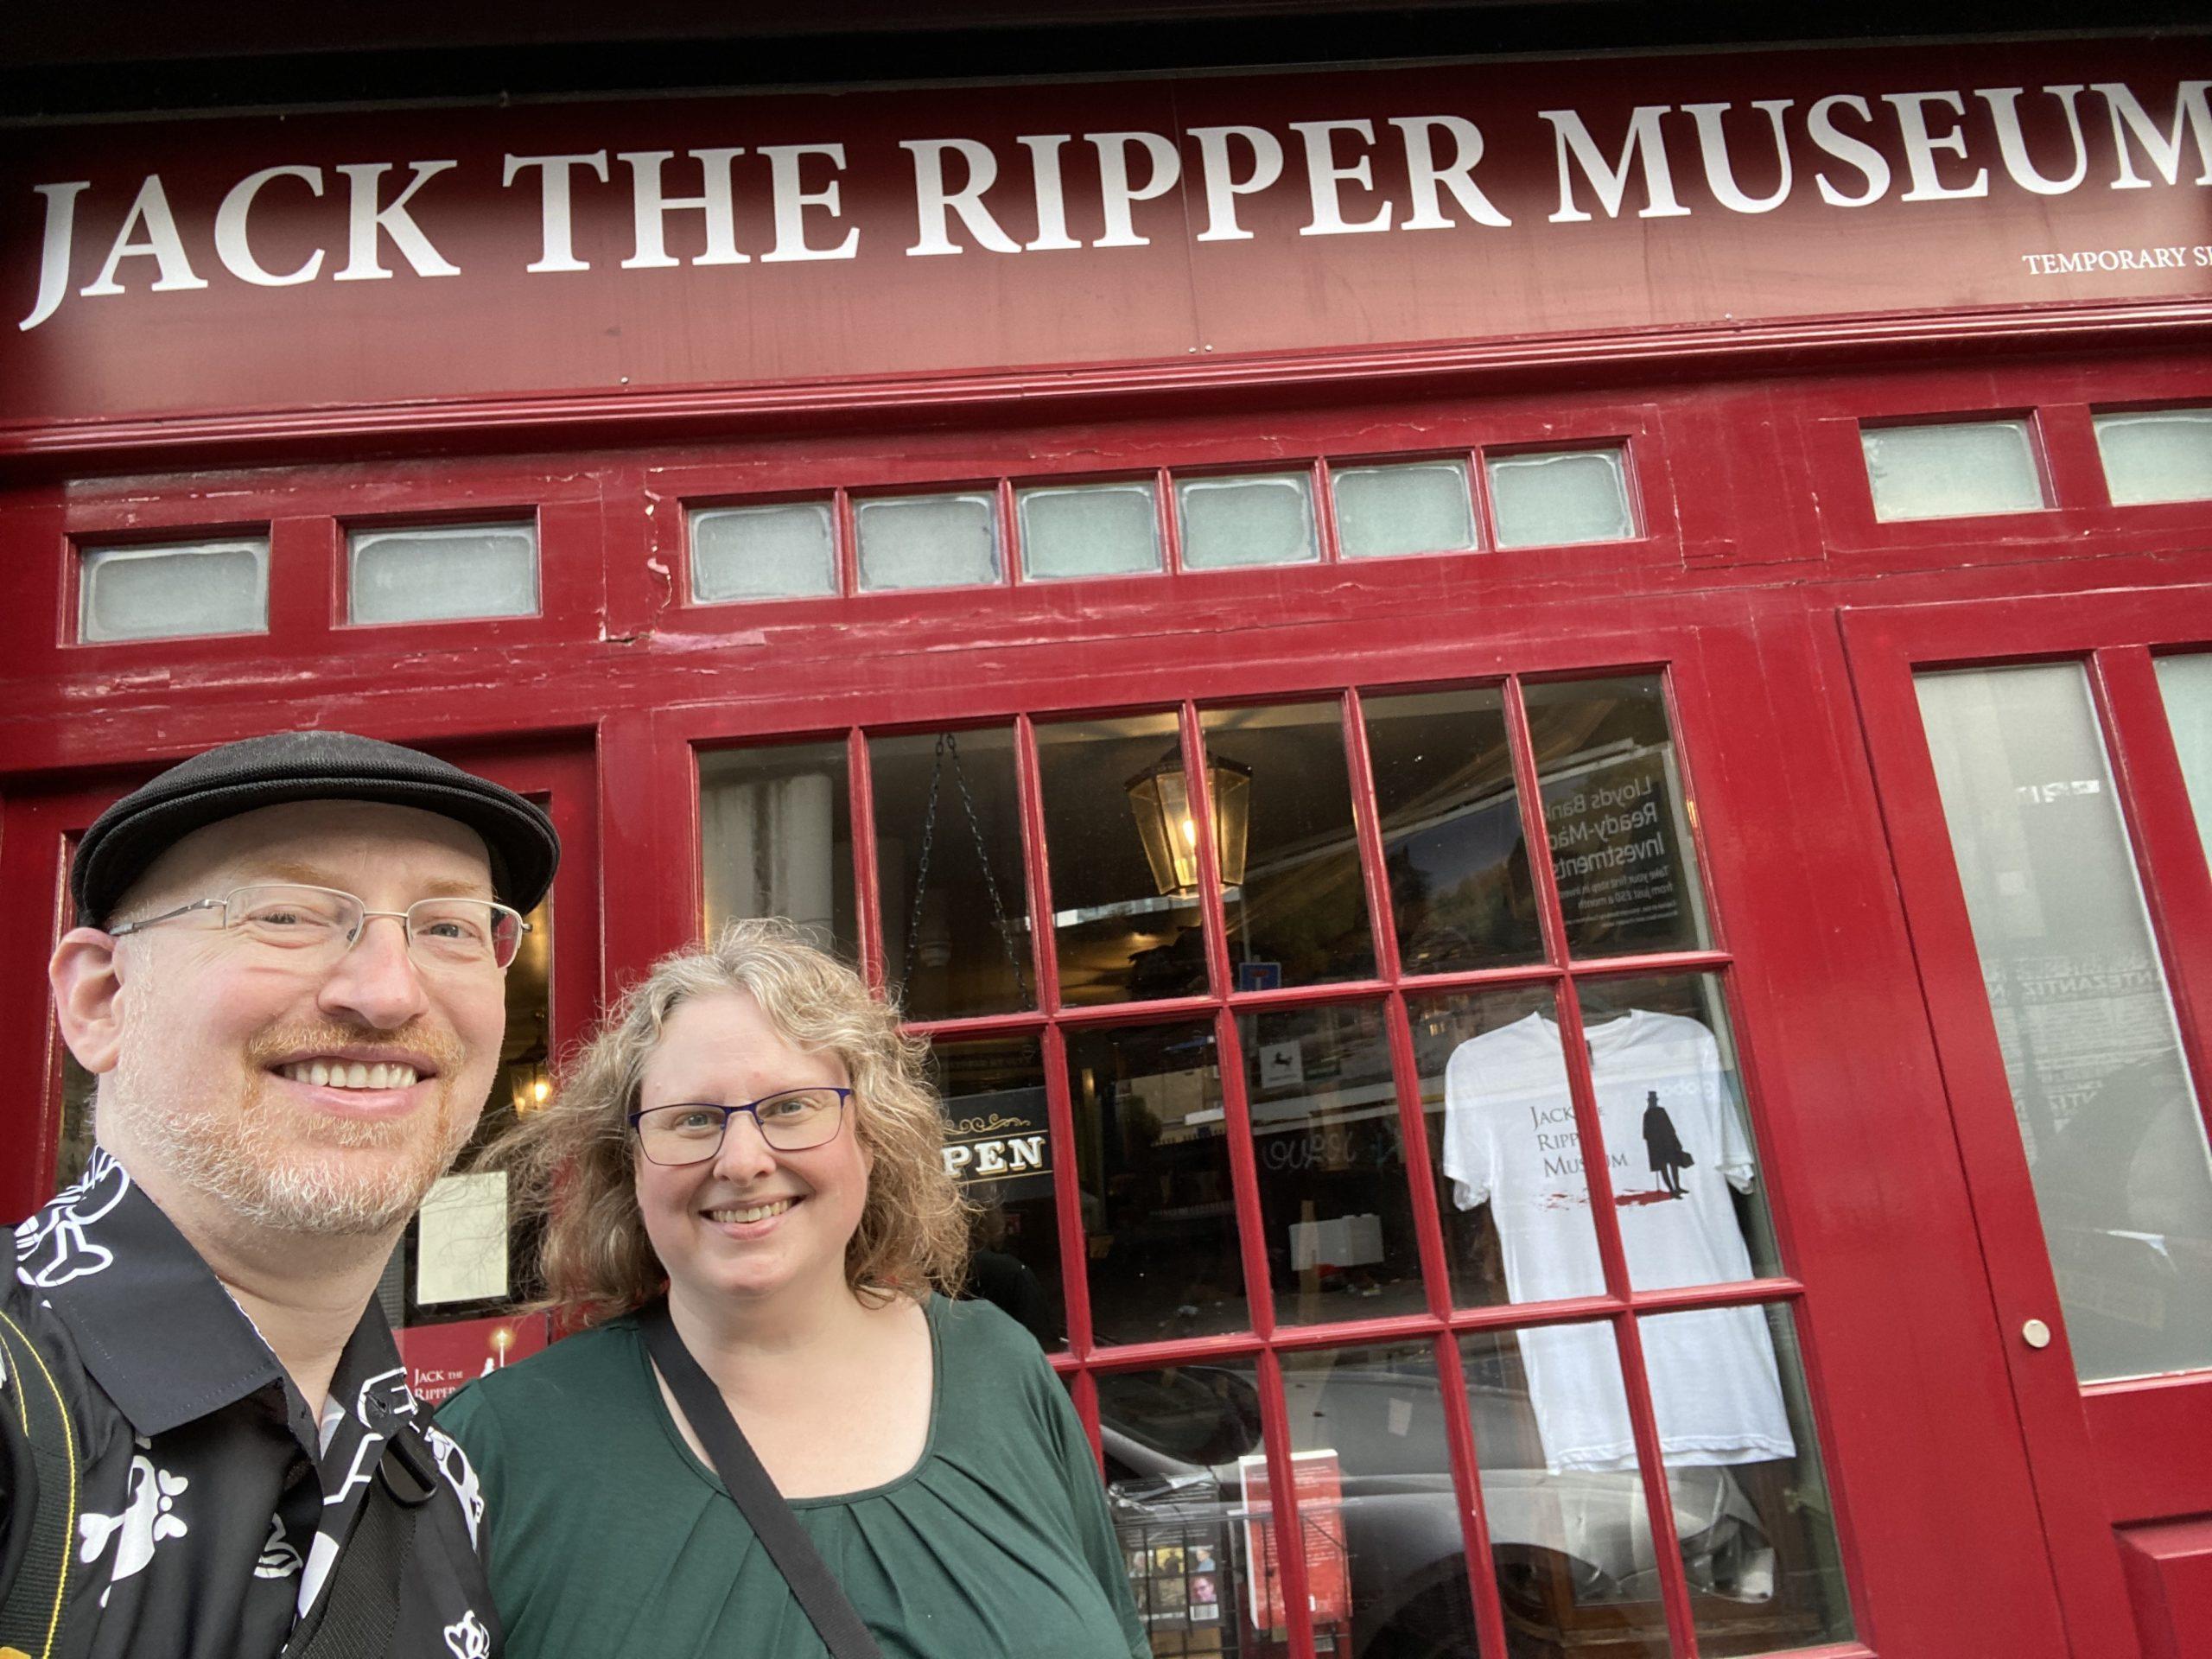 My wife and I standing in front of the Jack the Ripper Museum.